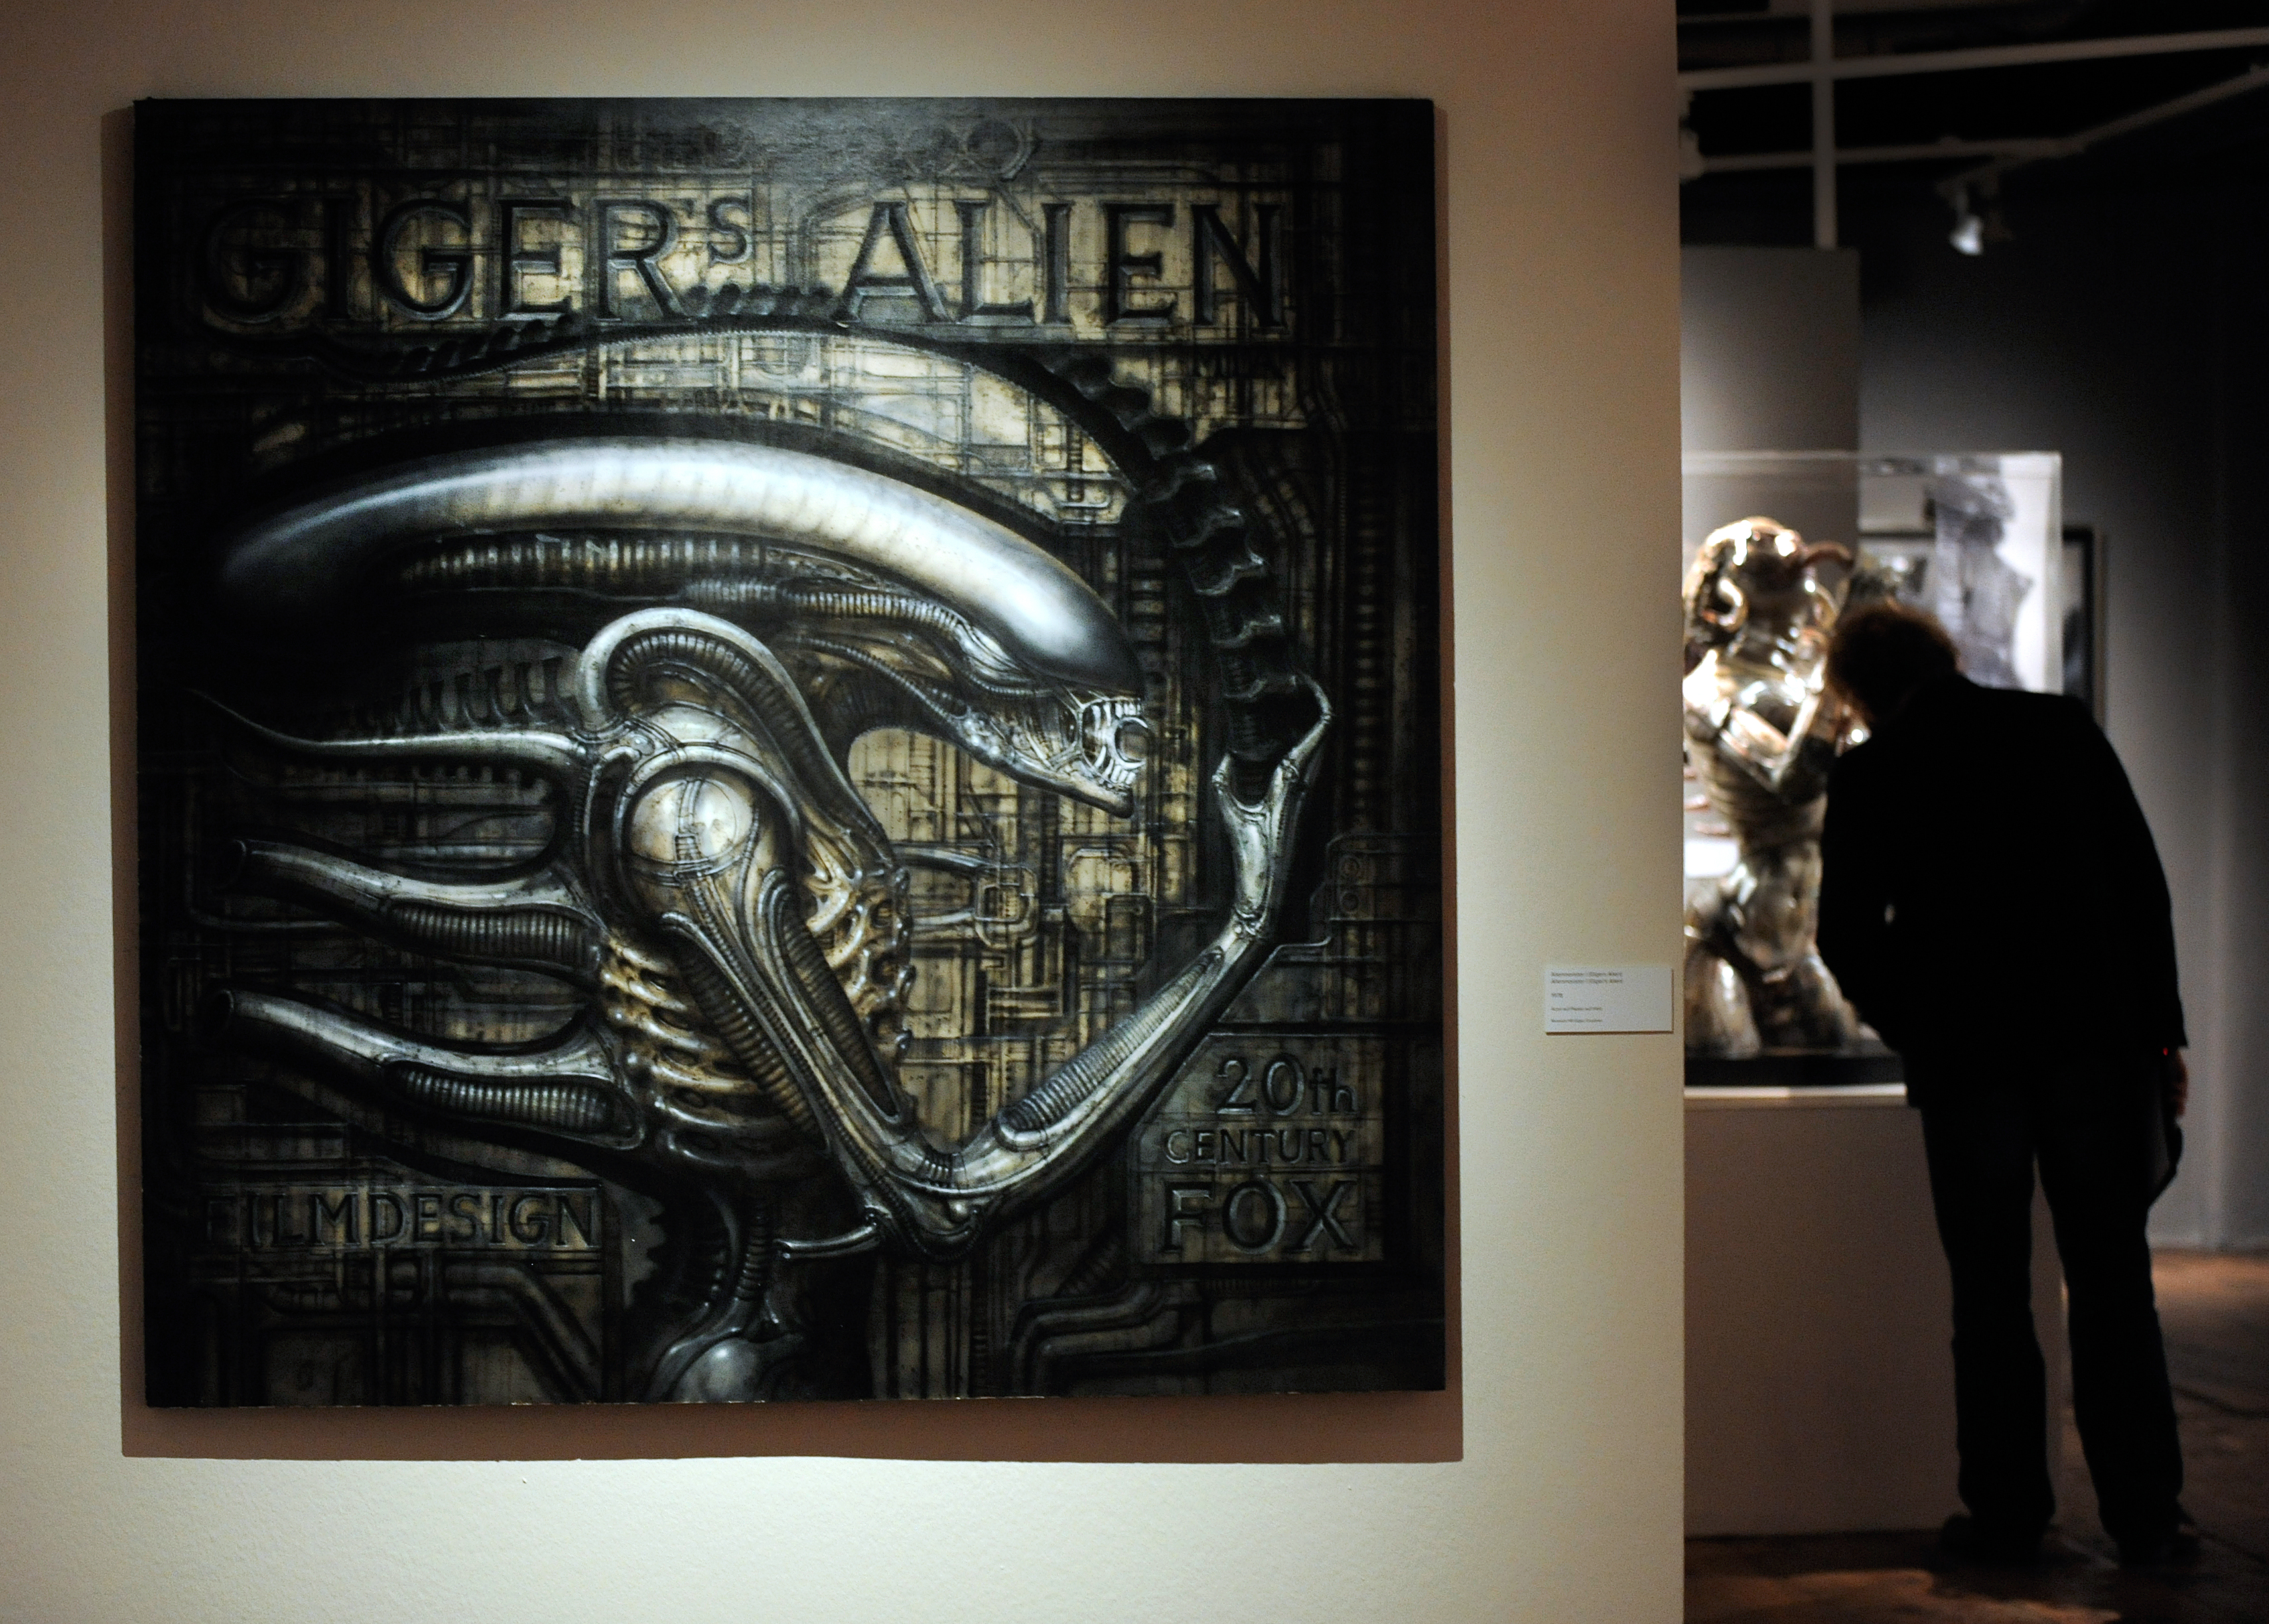 HR Giger's 'Alien' at the exhibition 'Traeume und Visionen' (Dreams and Visions) at the Kunsthaus Wien in Vienna on March 8, 2011.